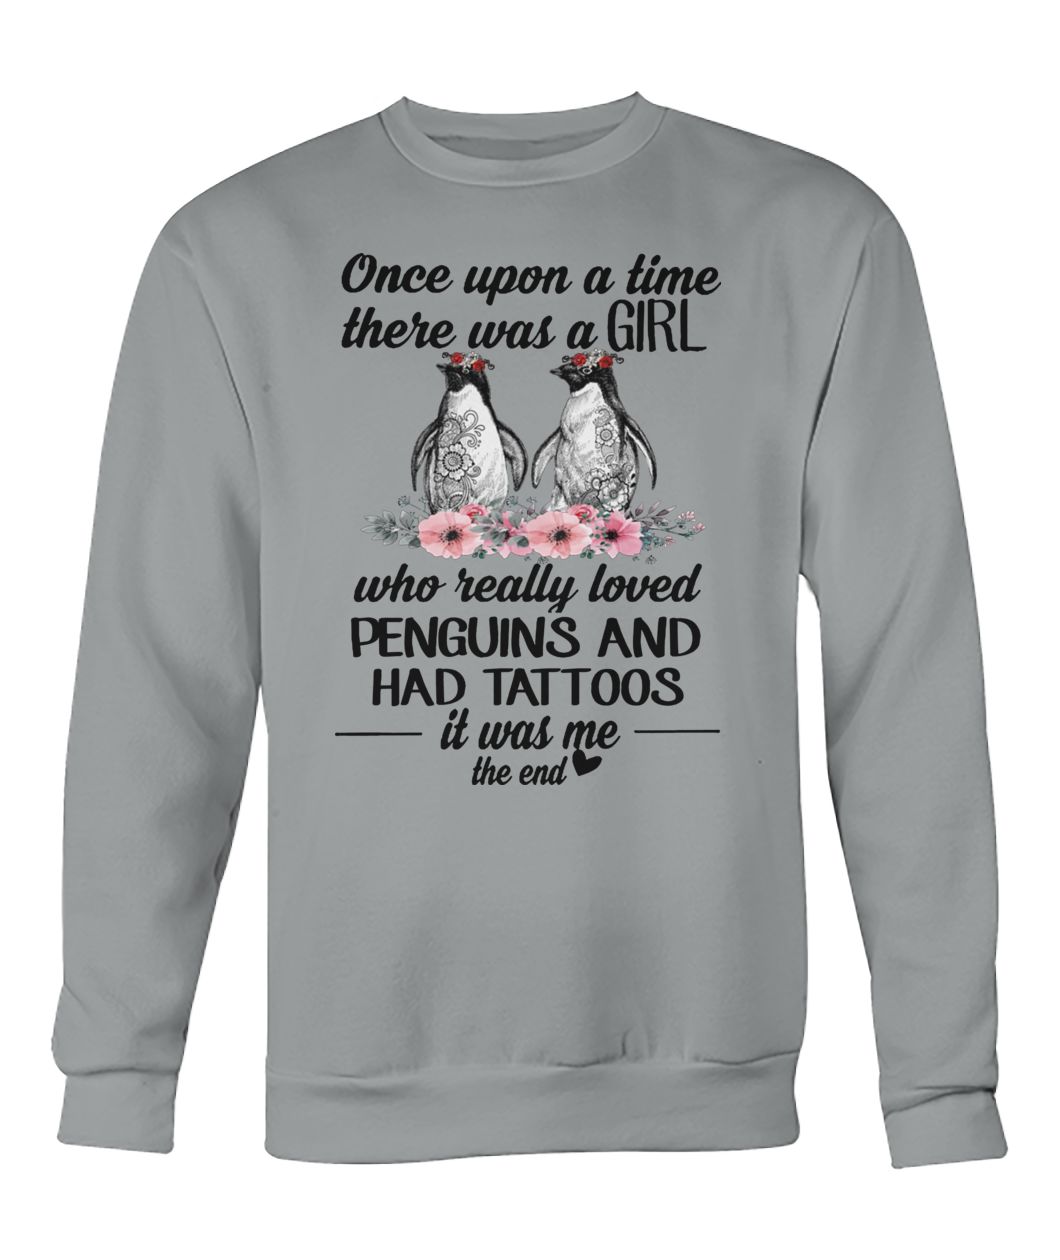 Once upon a time there was a girl who really loved penguins and had tattoos it was me the end crew neck sweatshirt